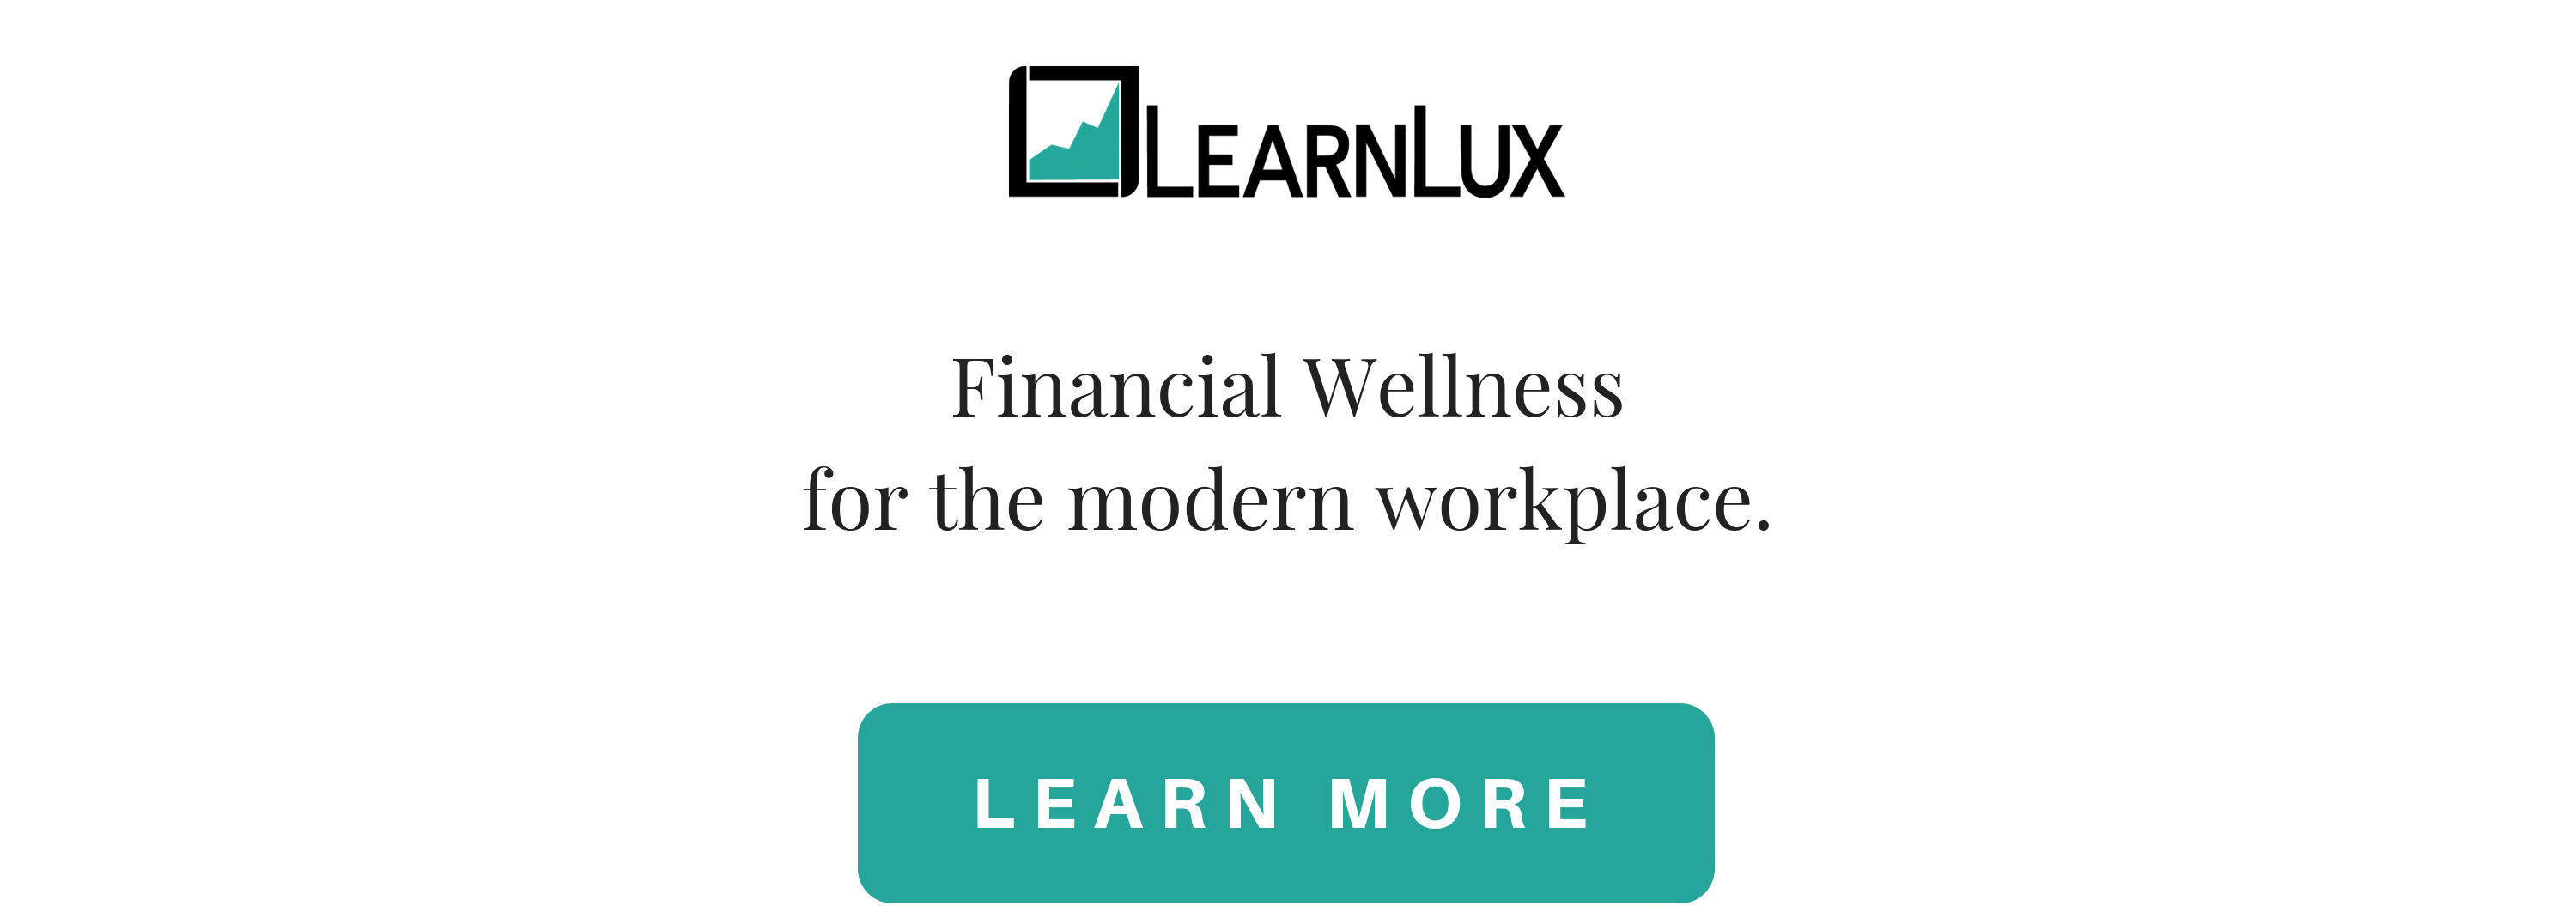 Learn more about financial wellness with learnlux